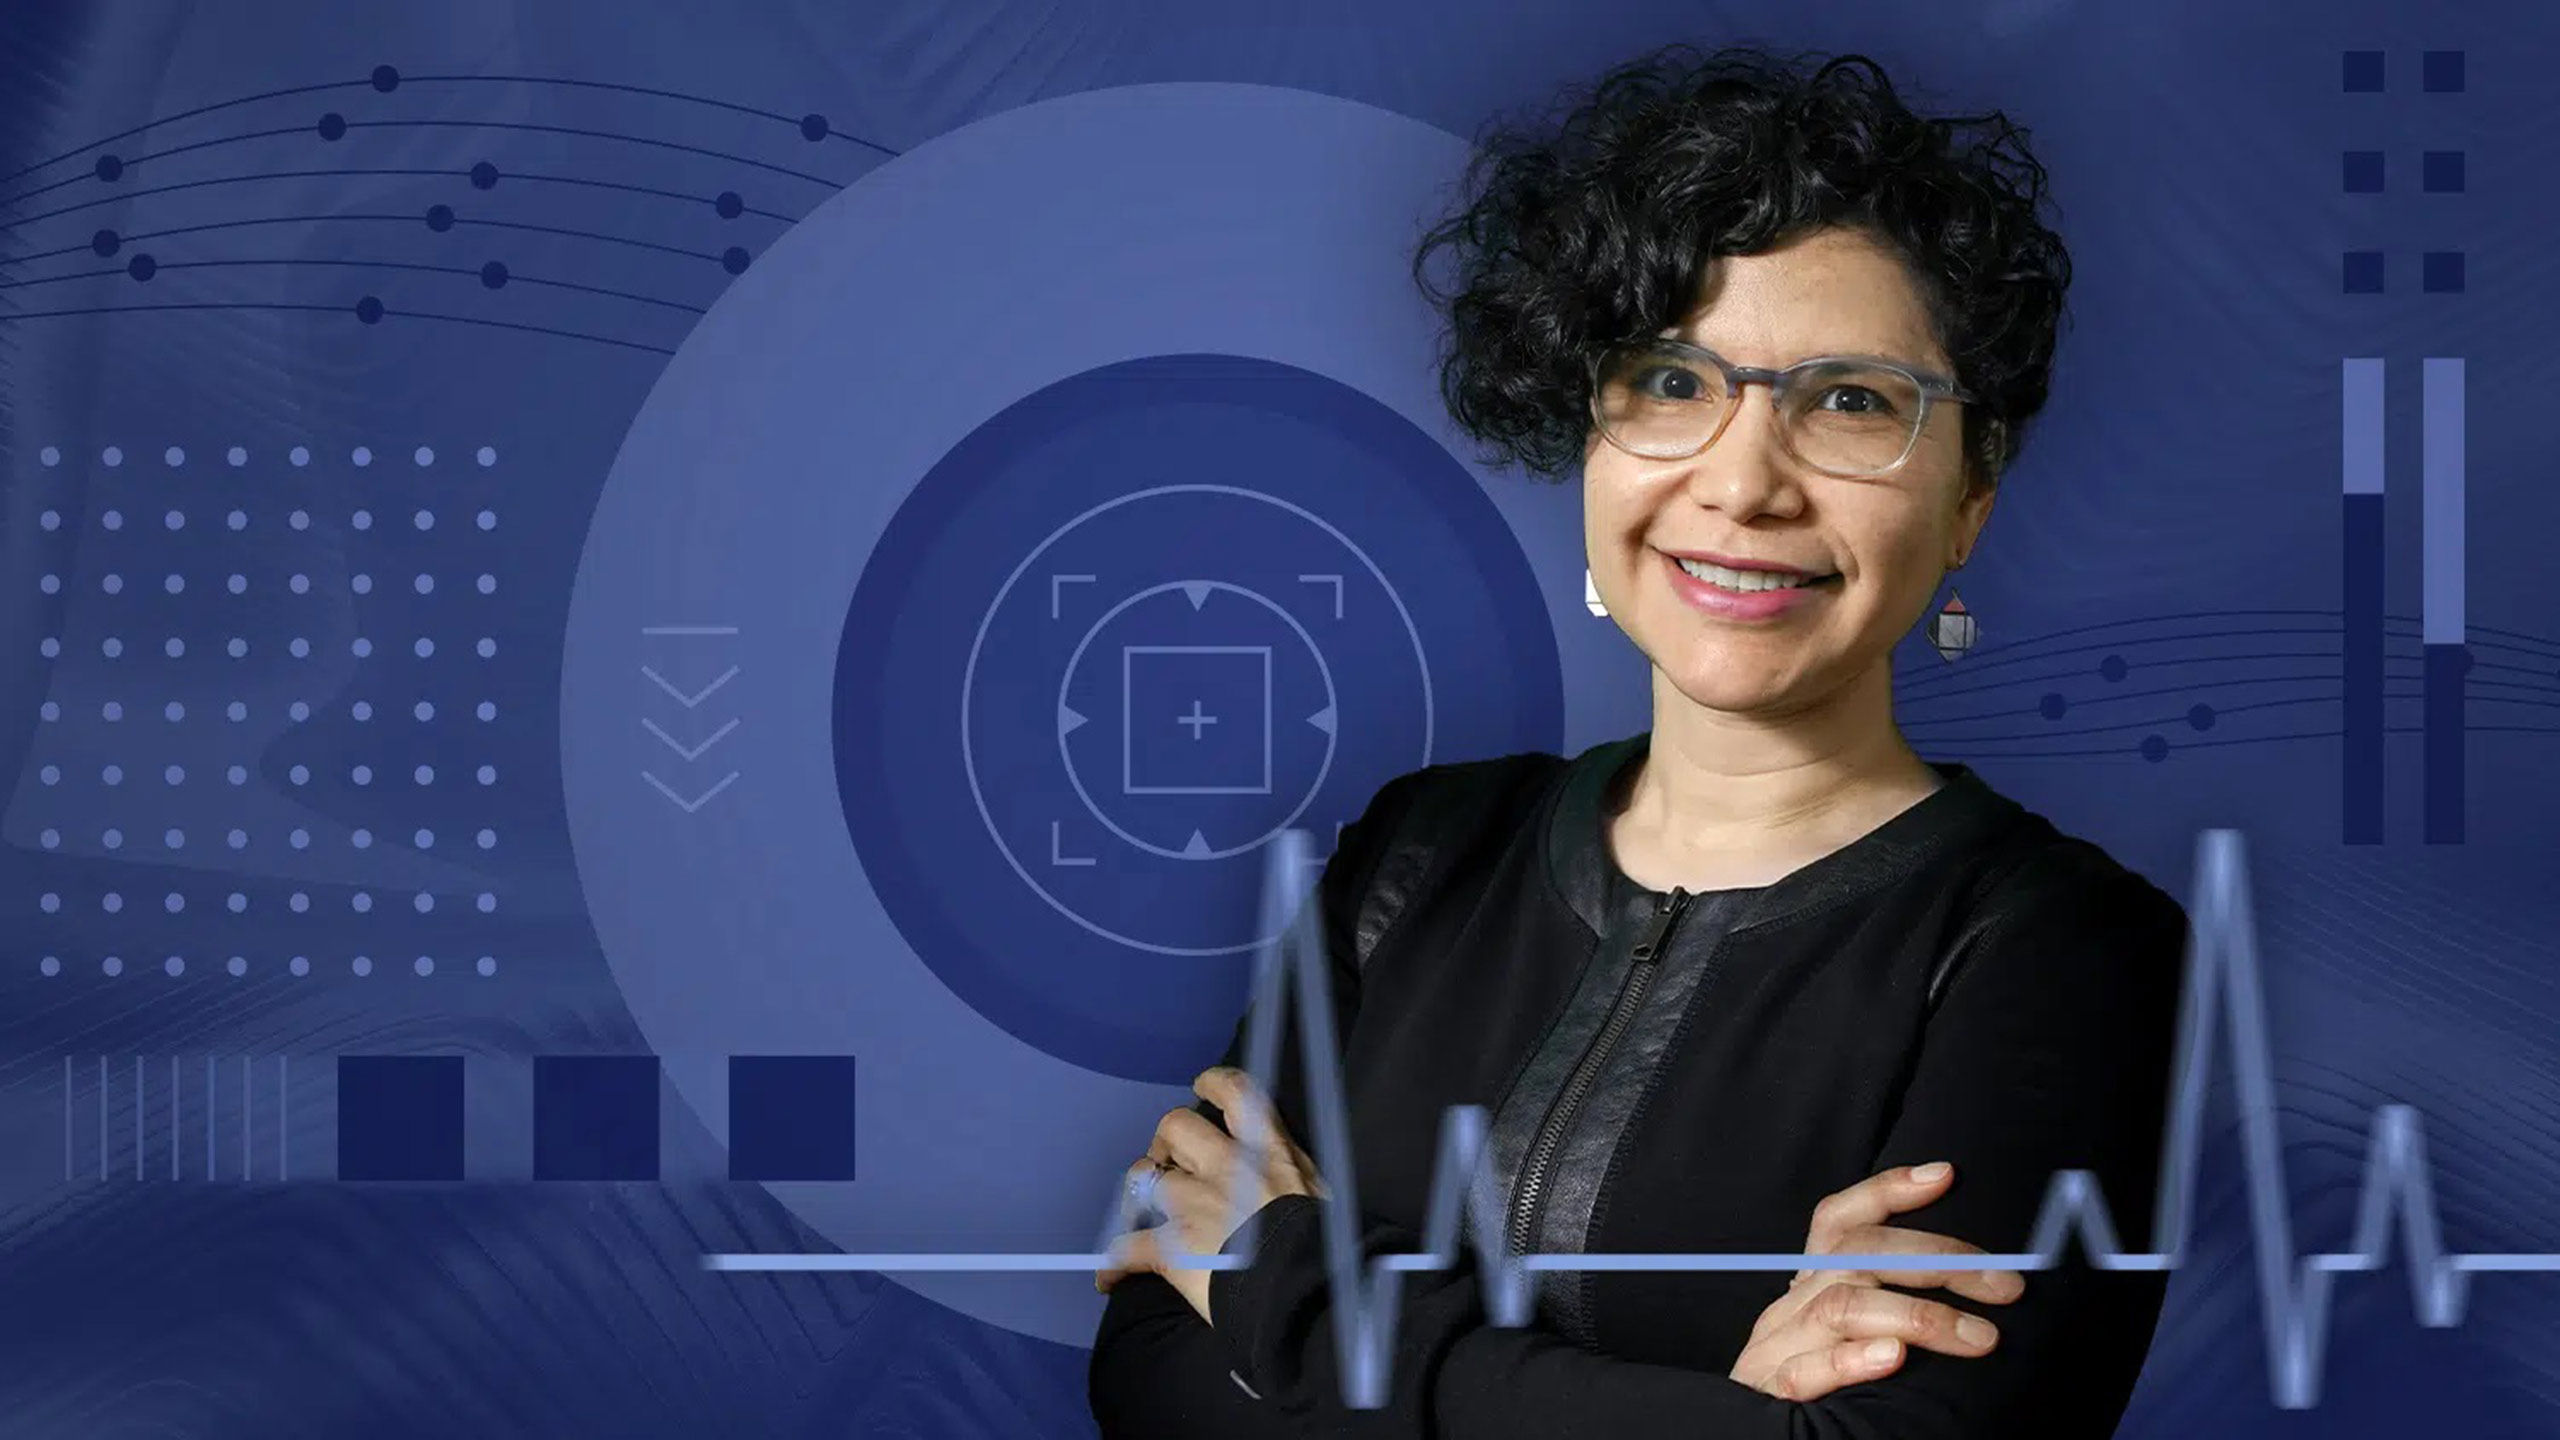 Maria Mayorga smiling in front of an abstract blue background.